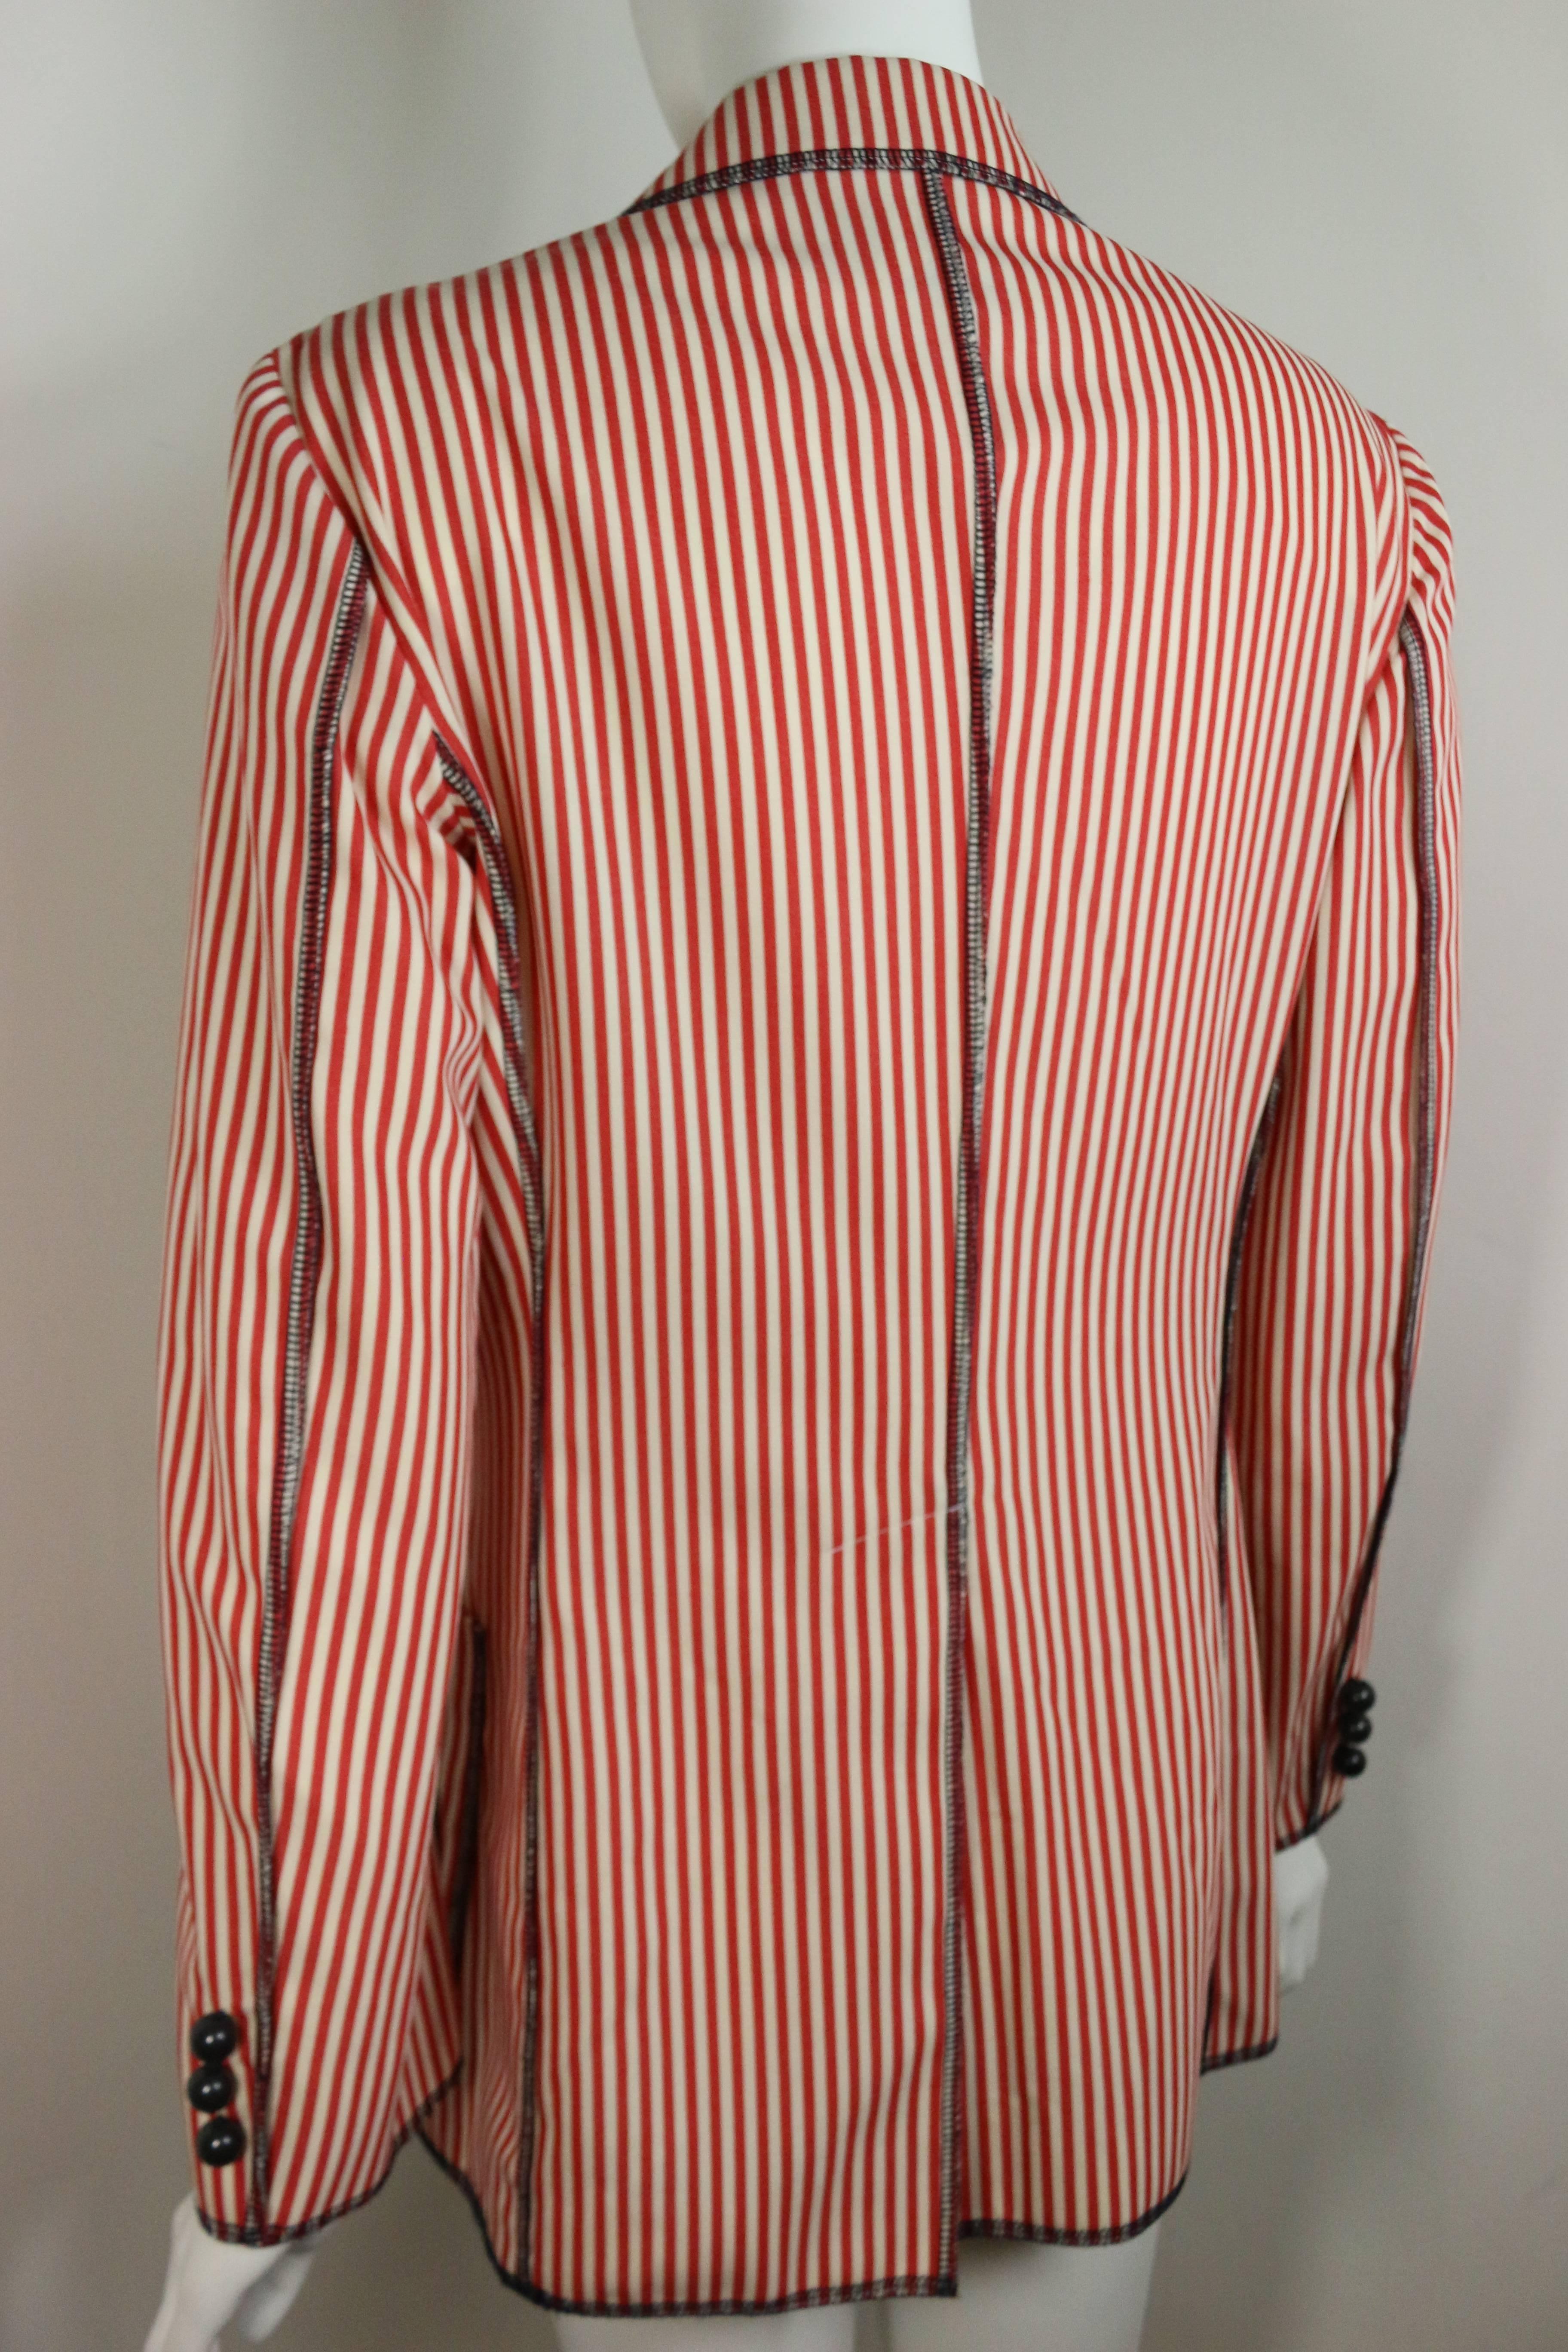 red and white striped jacket